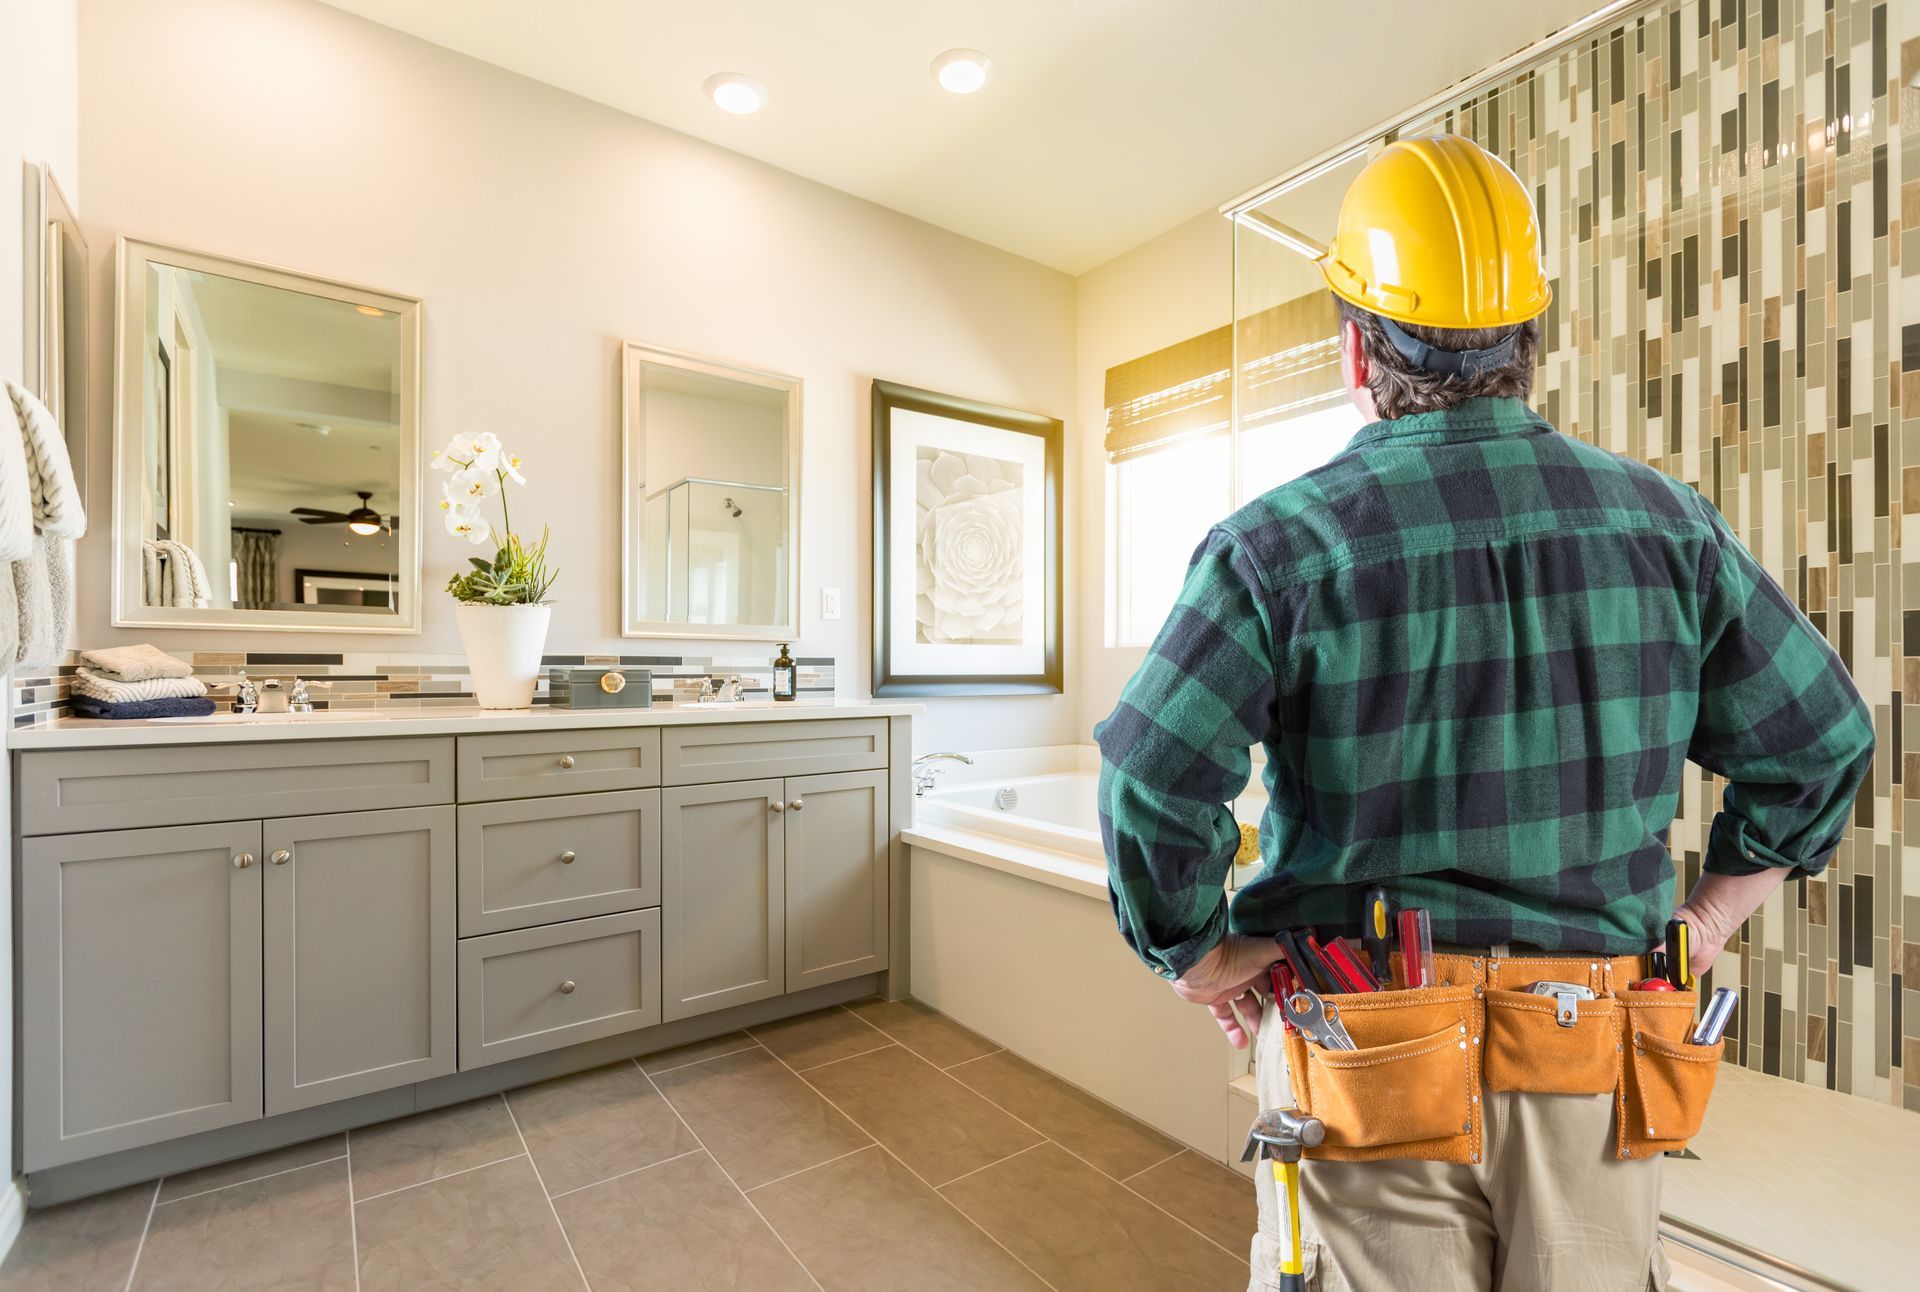 a contractor wearing a hard hat is standing in a bathroom, ready to provide a Bathroom Remodeling Quote for those who call.